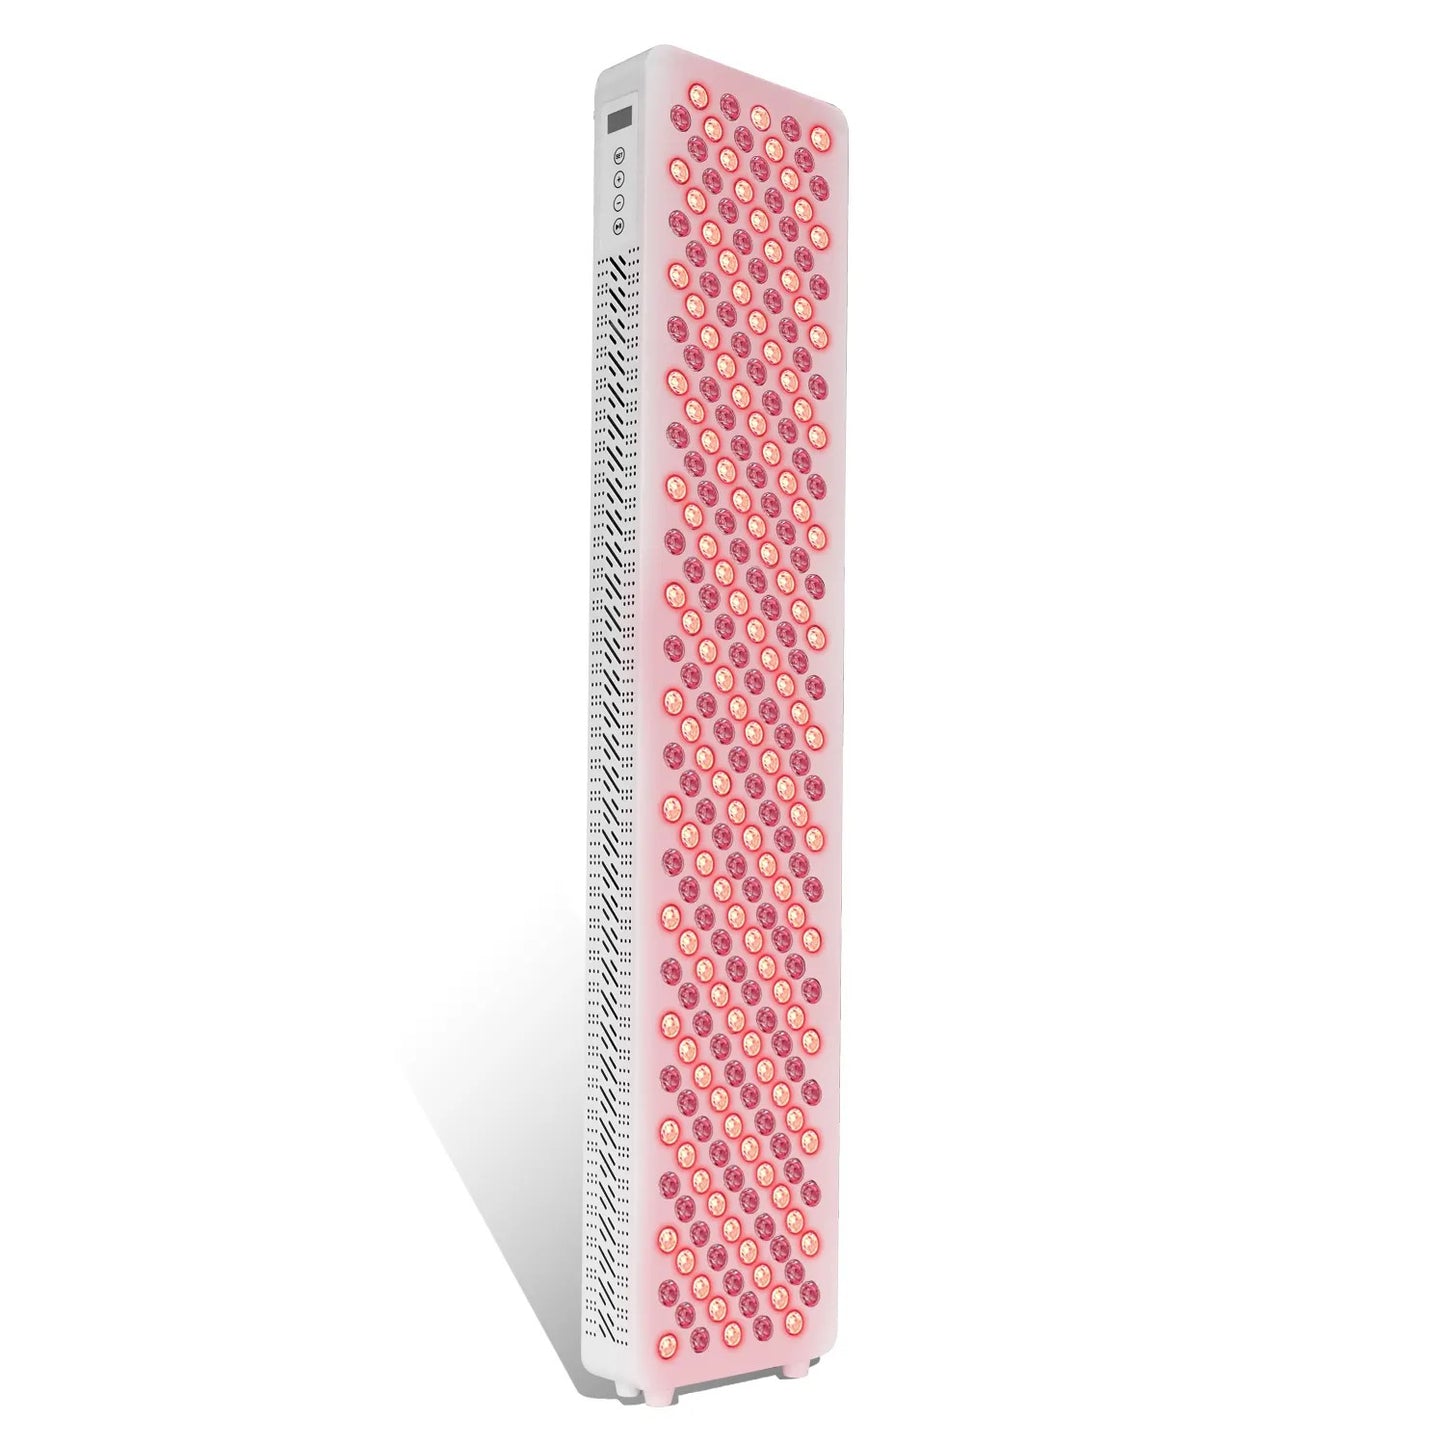 Large body Ultra - Home Light Therapy